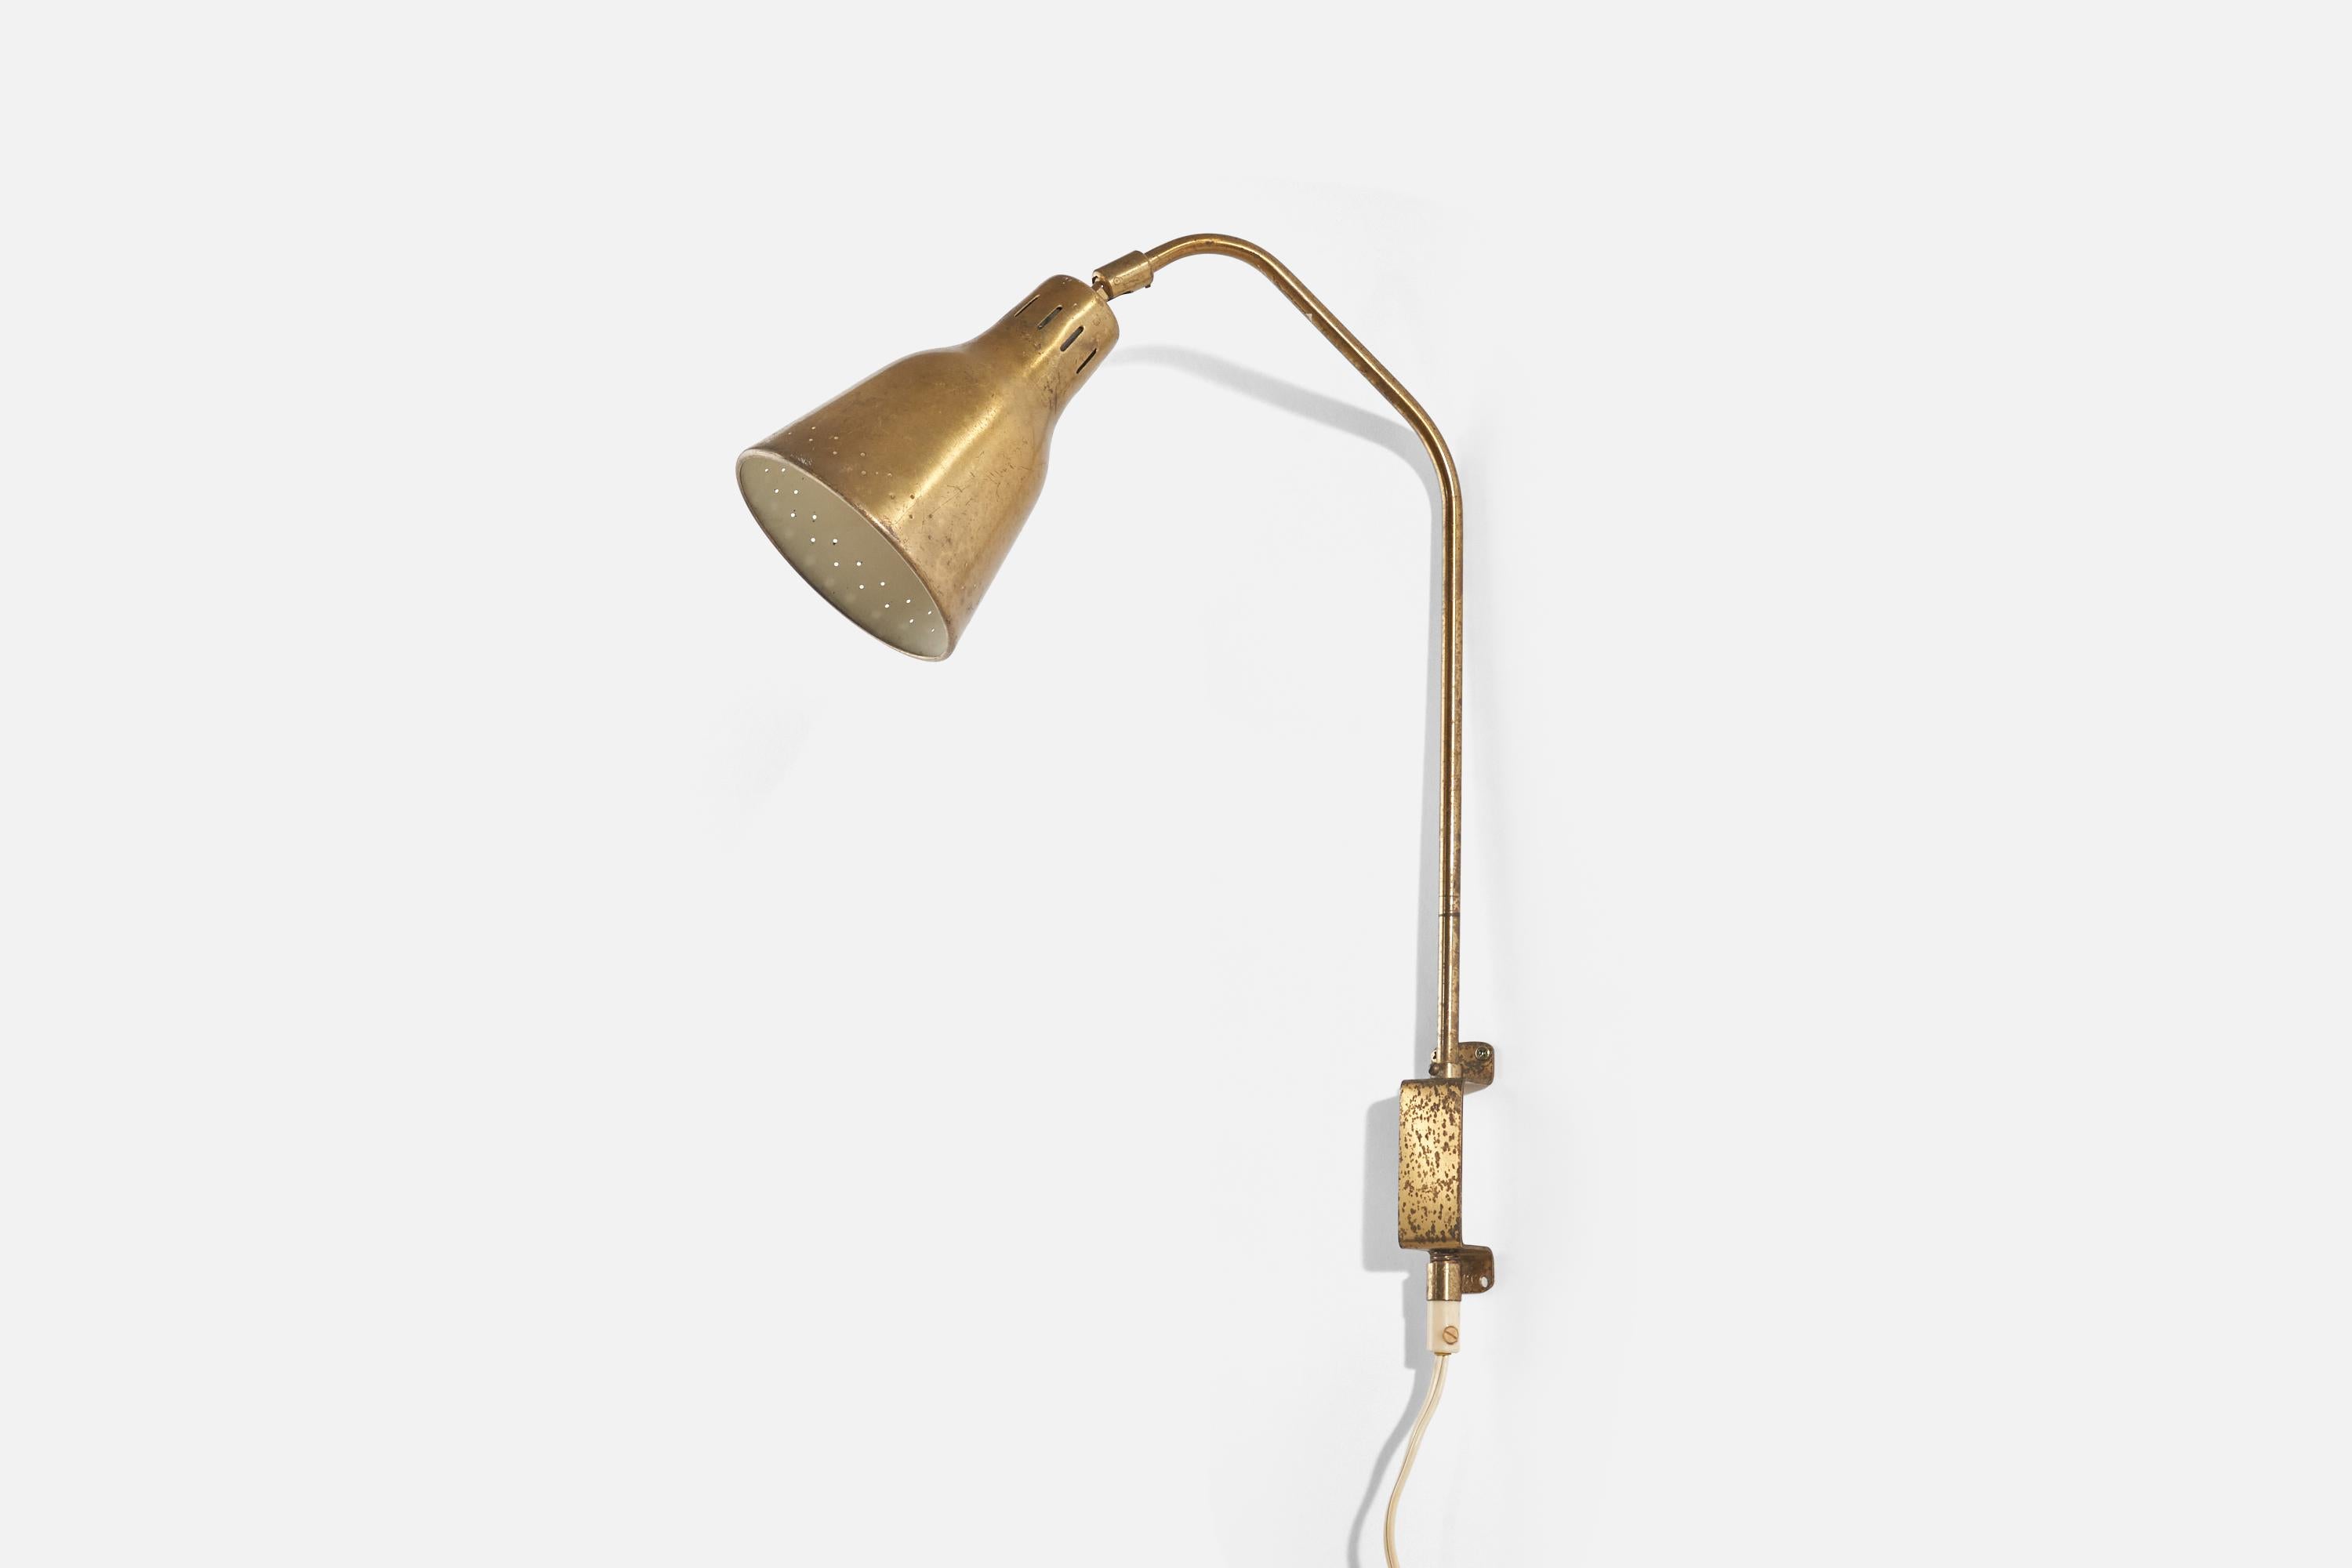 A brass sconce / wall light designed and produced by Bröderna Malmströms Metallvarufabrik, Malmö, Sweden, 1940s.

Variable dimensions, measured as illustrated in the first image.

Dimensions of Back Plate (inches) : 4.19 x 1.19 x 1.13 (Height x